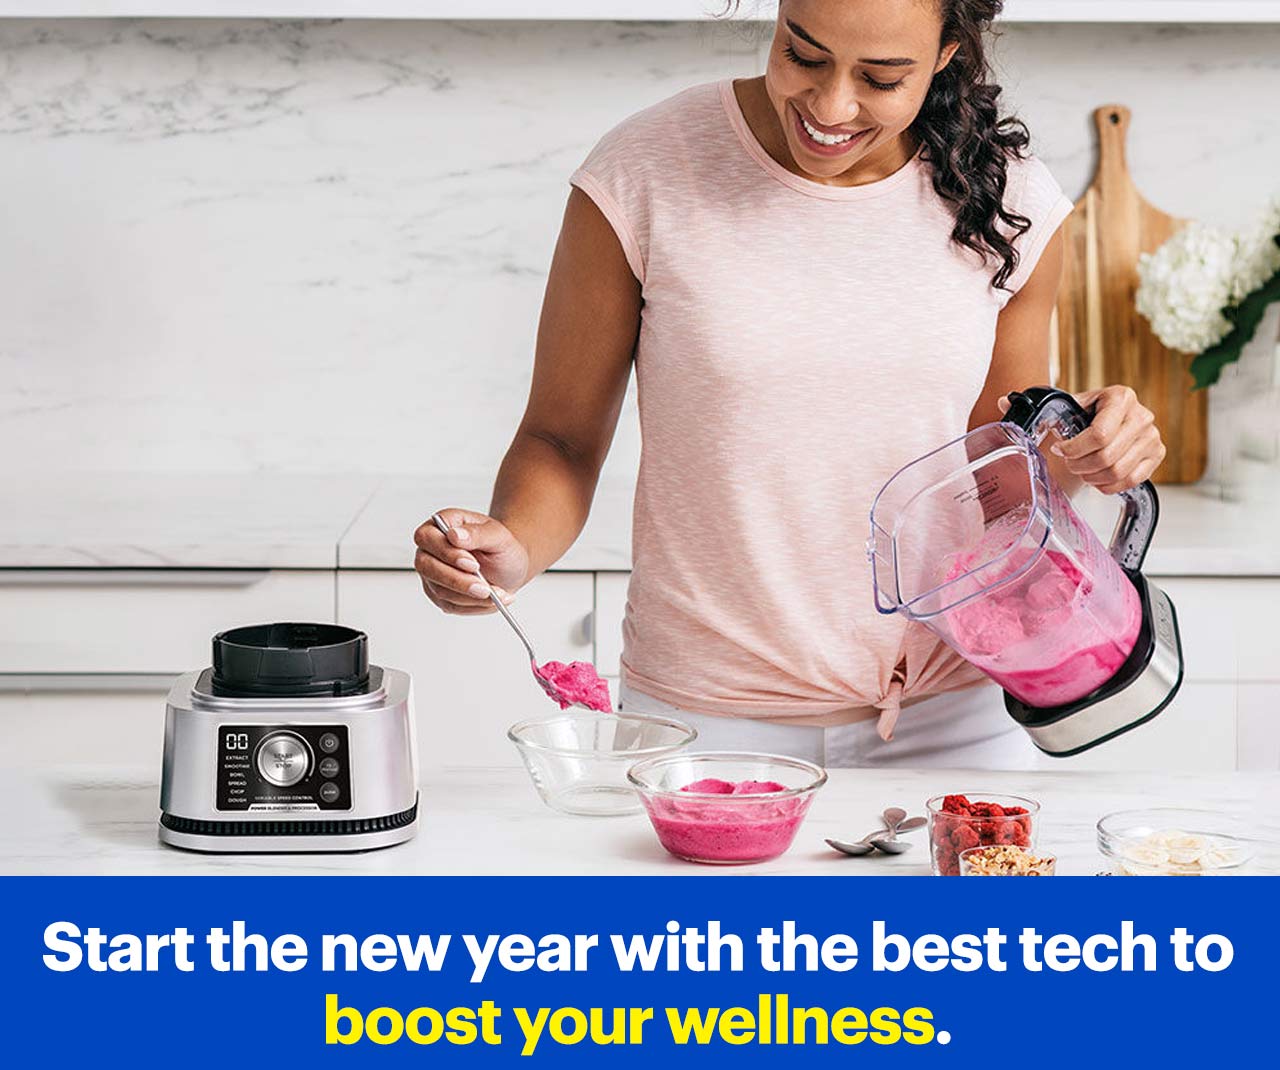 Start the new year with the best tech to boost your wellness. O i s oo Start the new year with the best tech to 